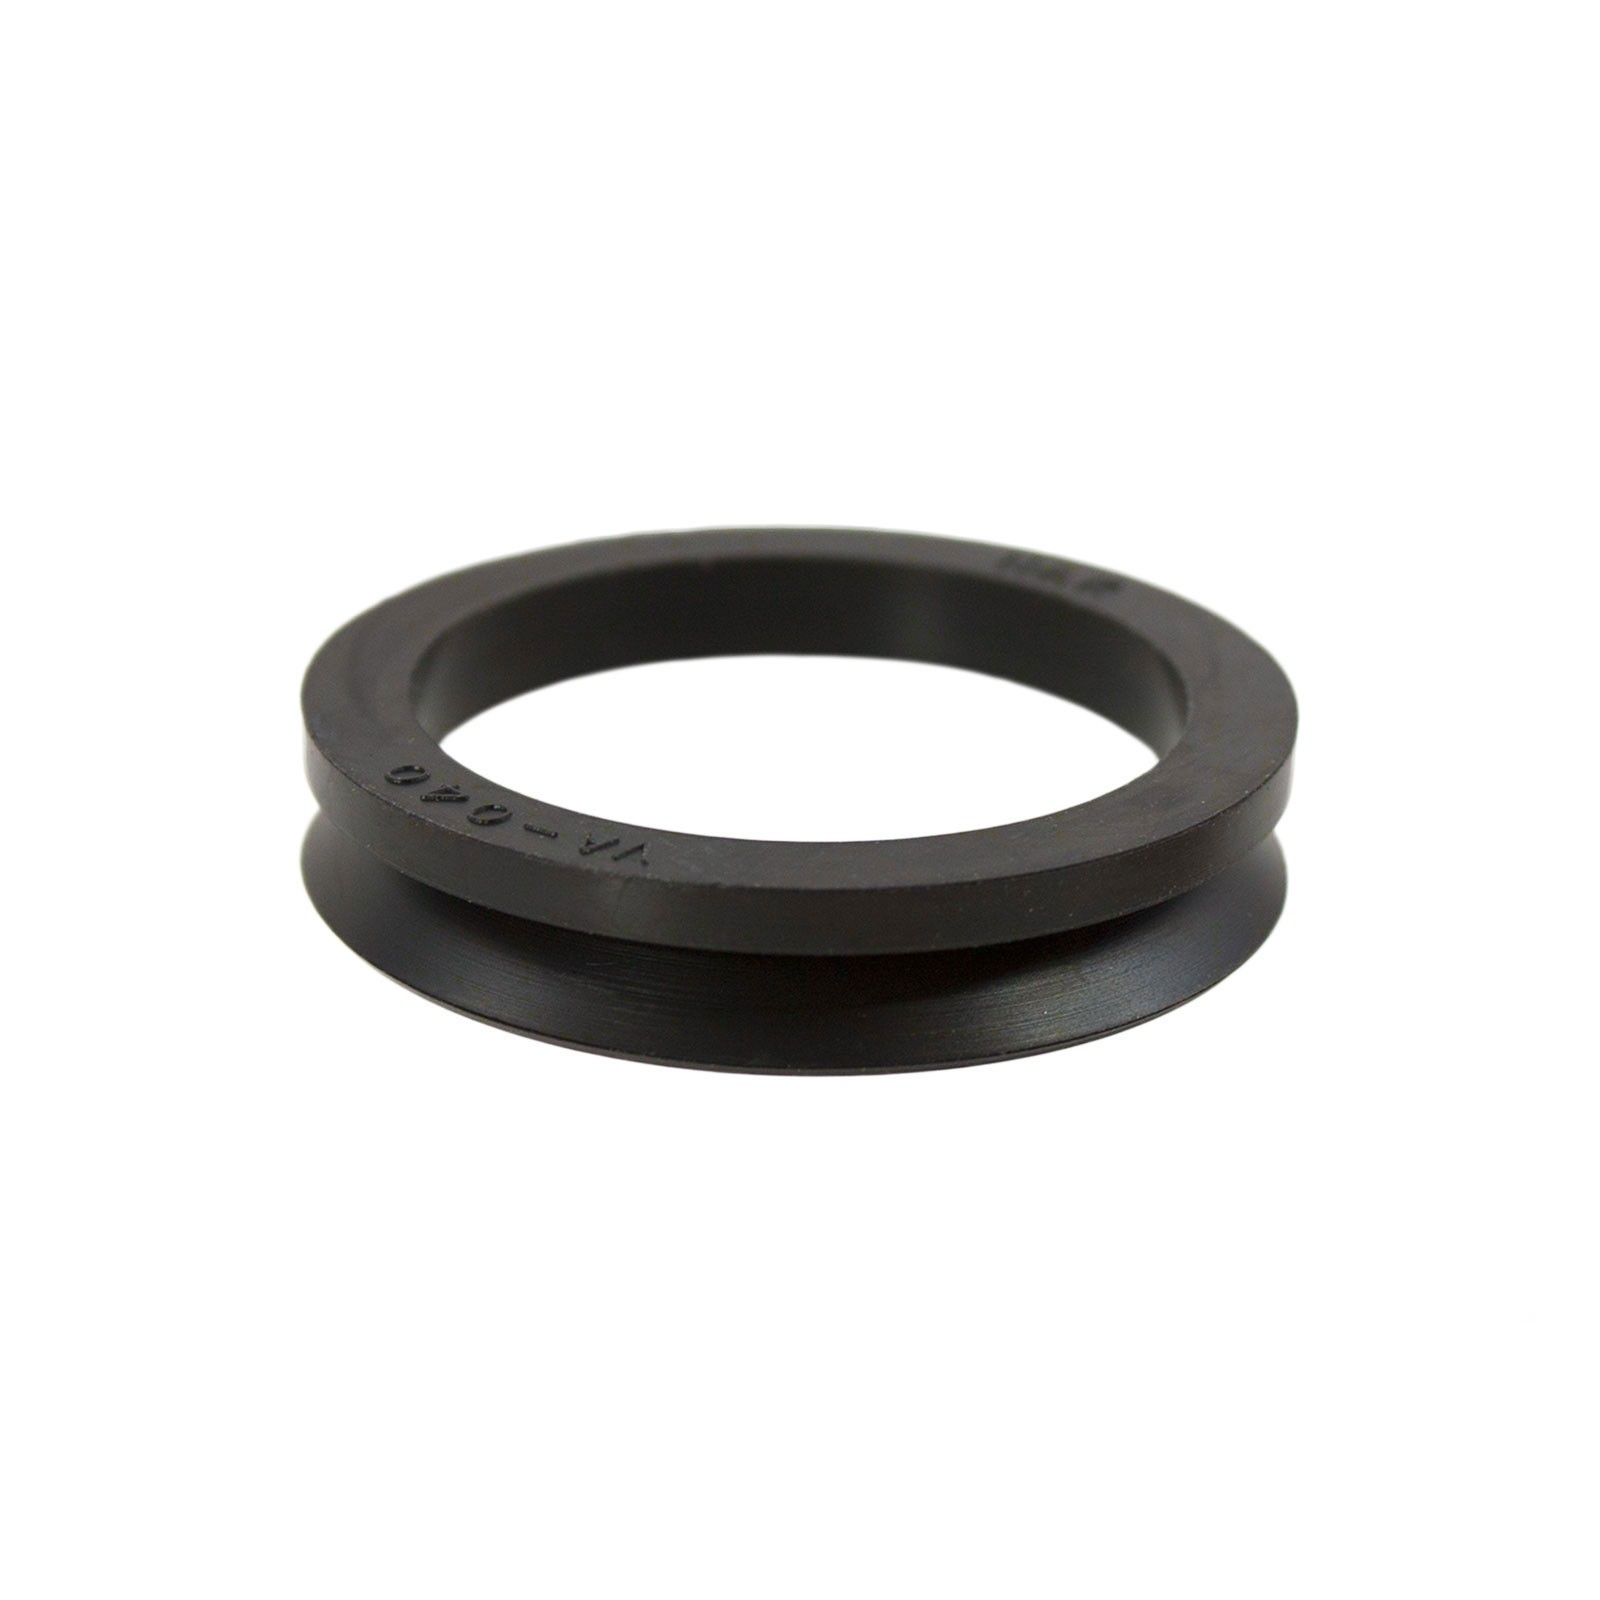 RING TYPE JOINT (RTJ) FLANGE - Wealson